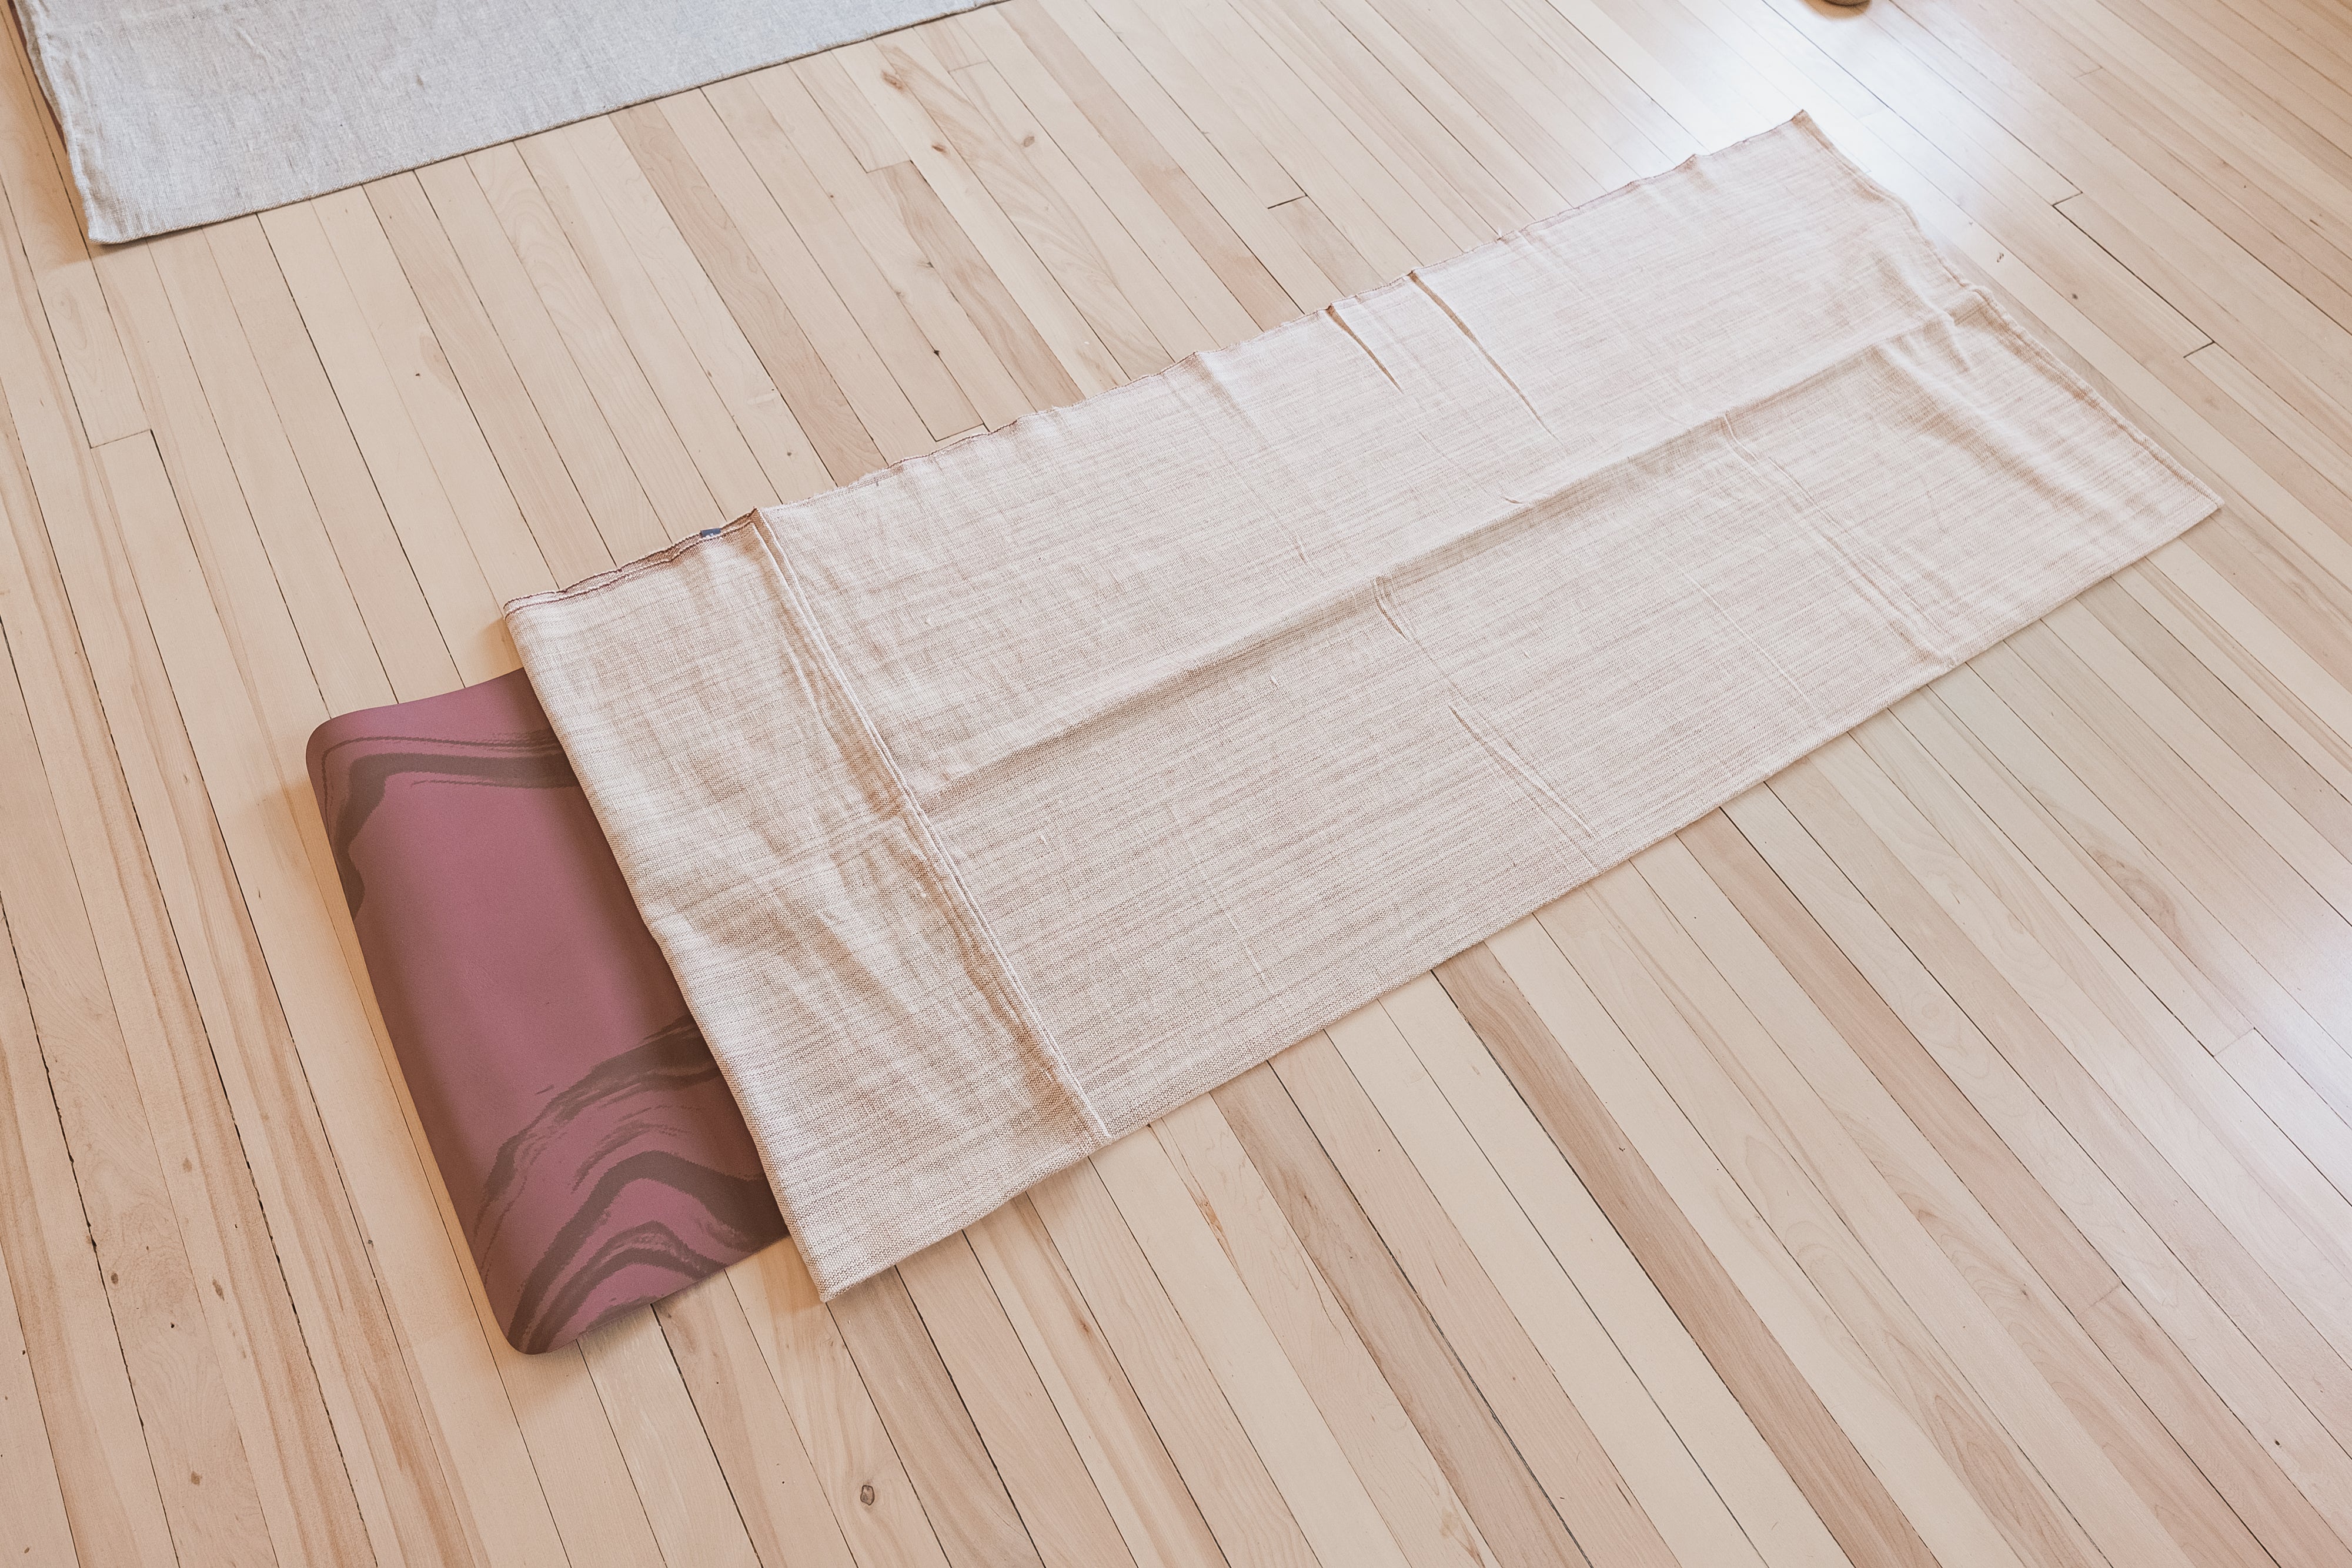 Yoga mat on a wooden floor with a yoga blanket on top of it.